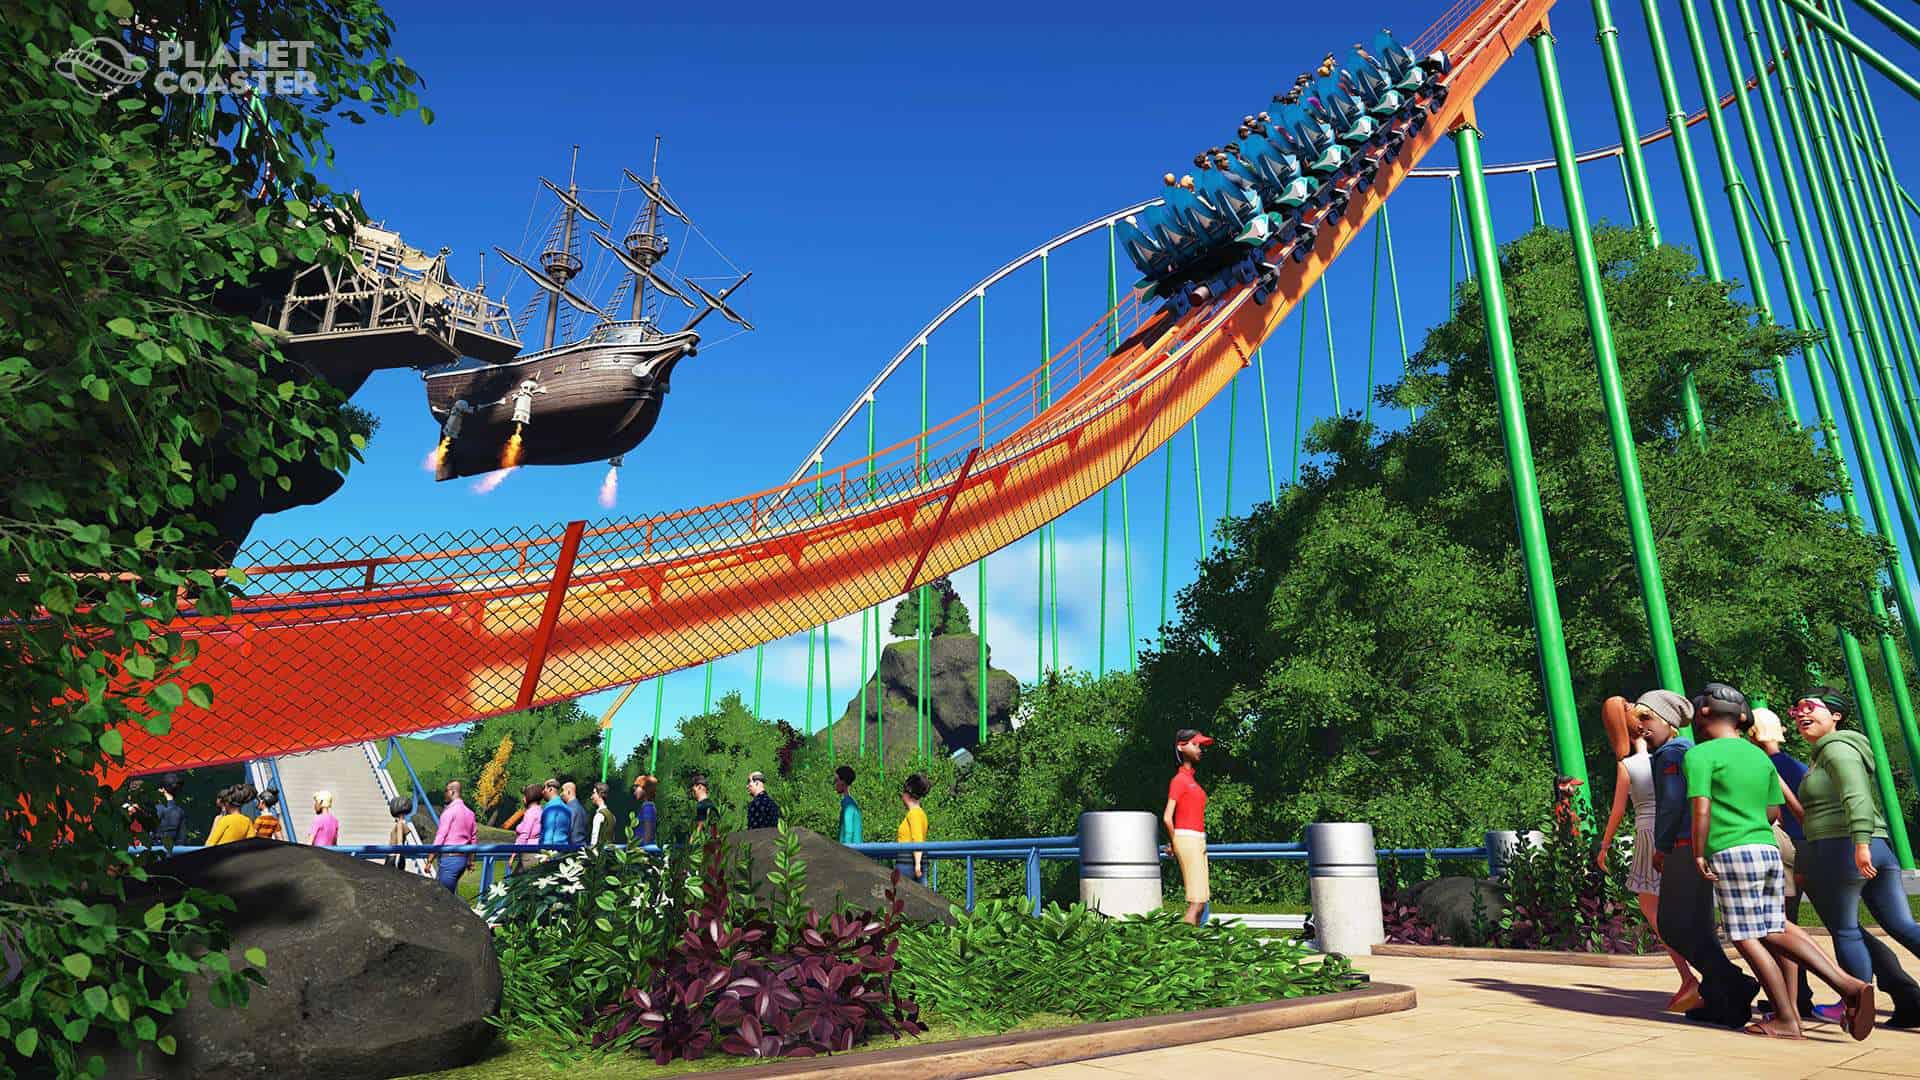 download free planetcoaster